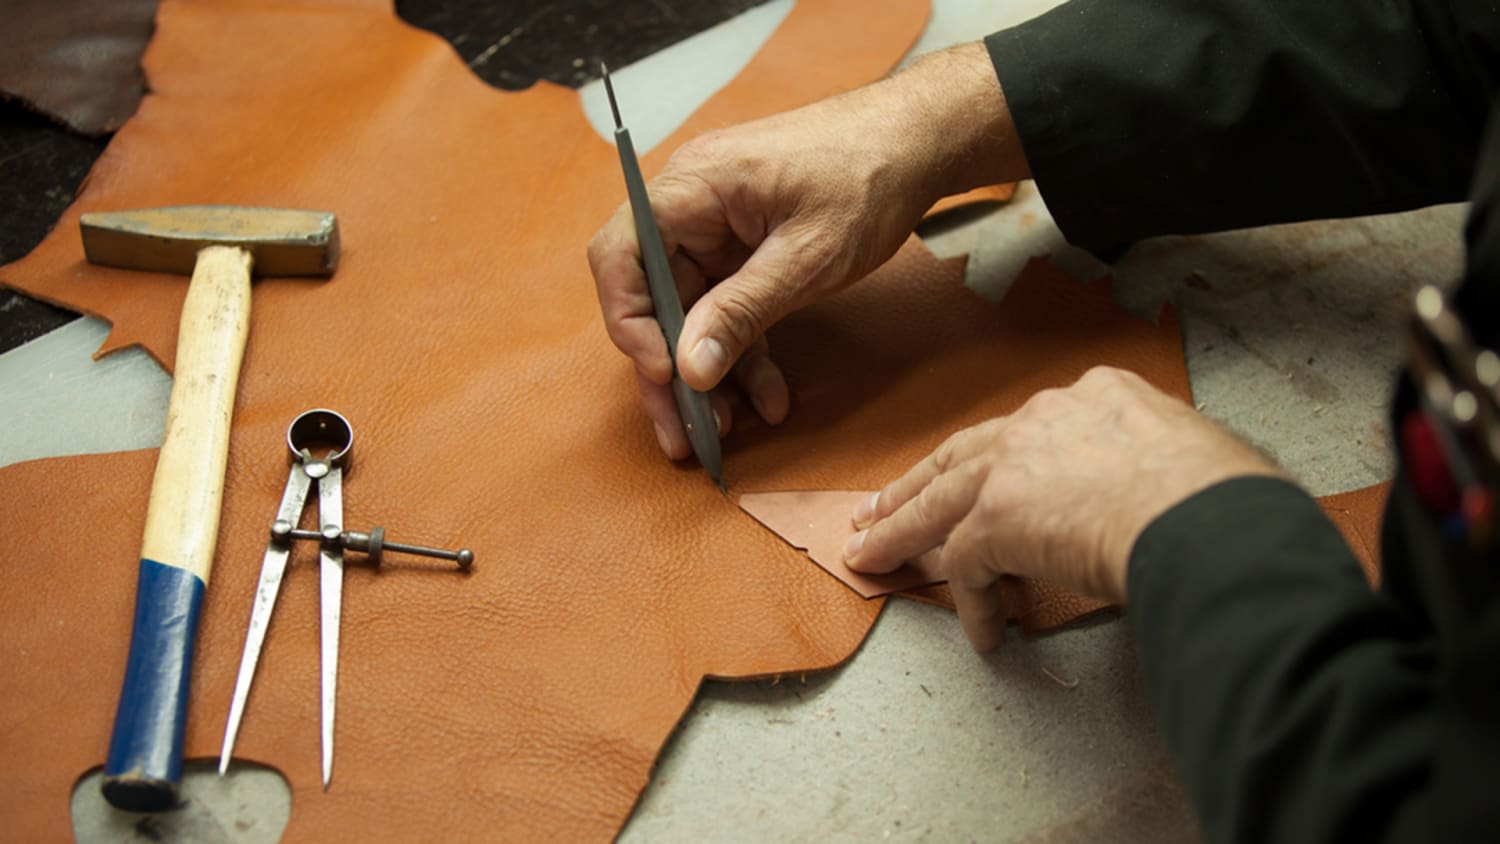 How lab-made leather could change the way we shop